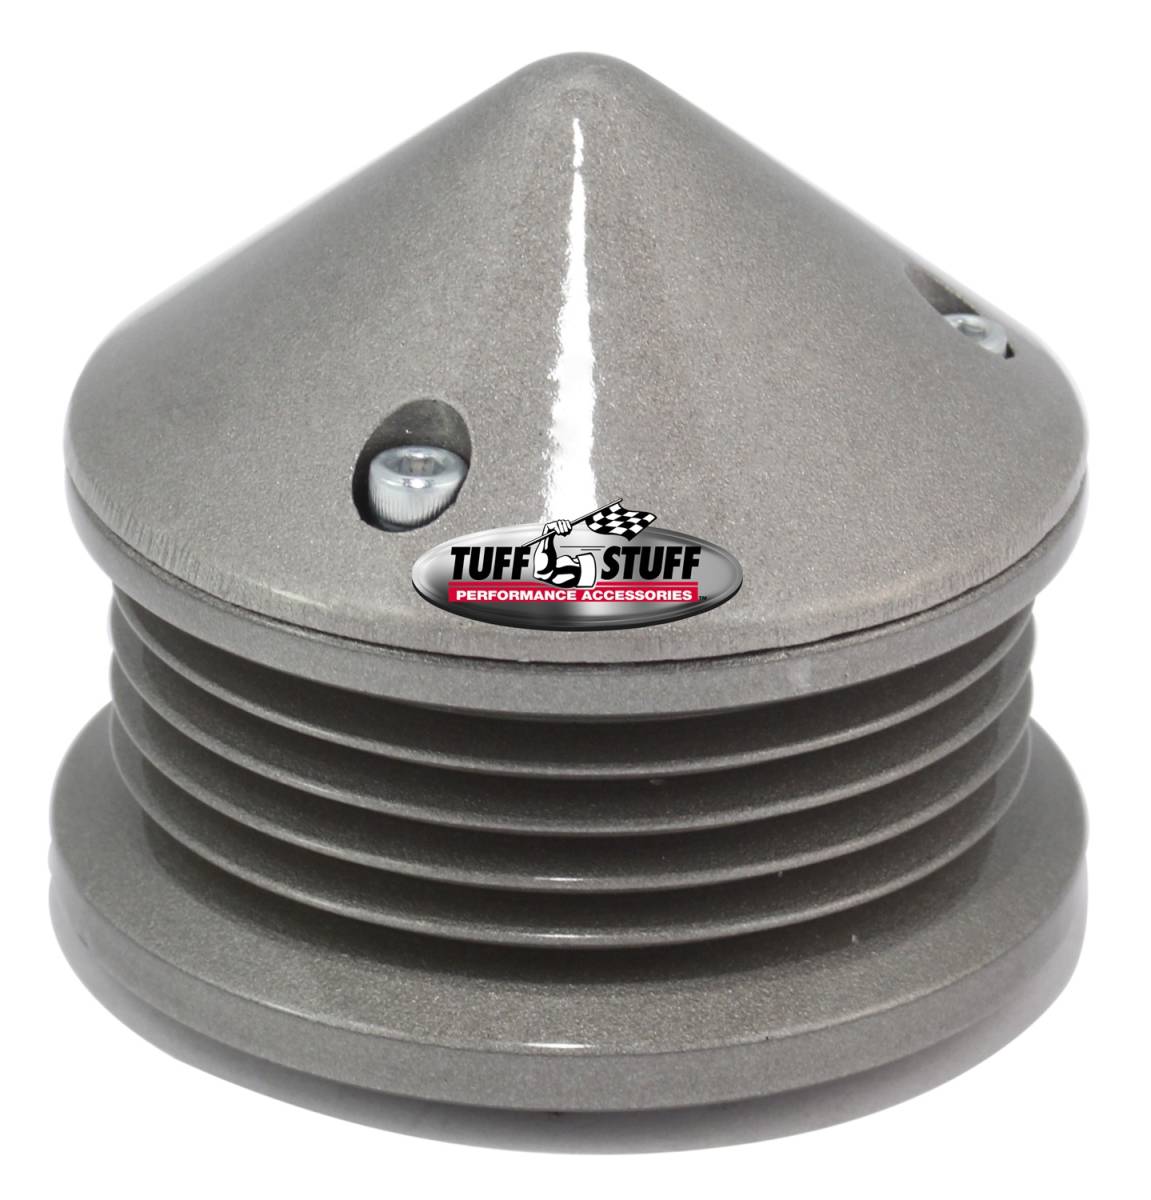 Tuff Stuff Performance - Alternator Pulley And Bullet Cover 2.25 in. Pulley 5 Groove Serpentine Incl. Lock Washer/Nut Factory Cast PLUS+ 7652D